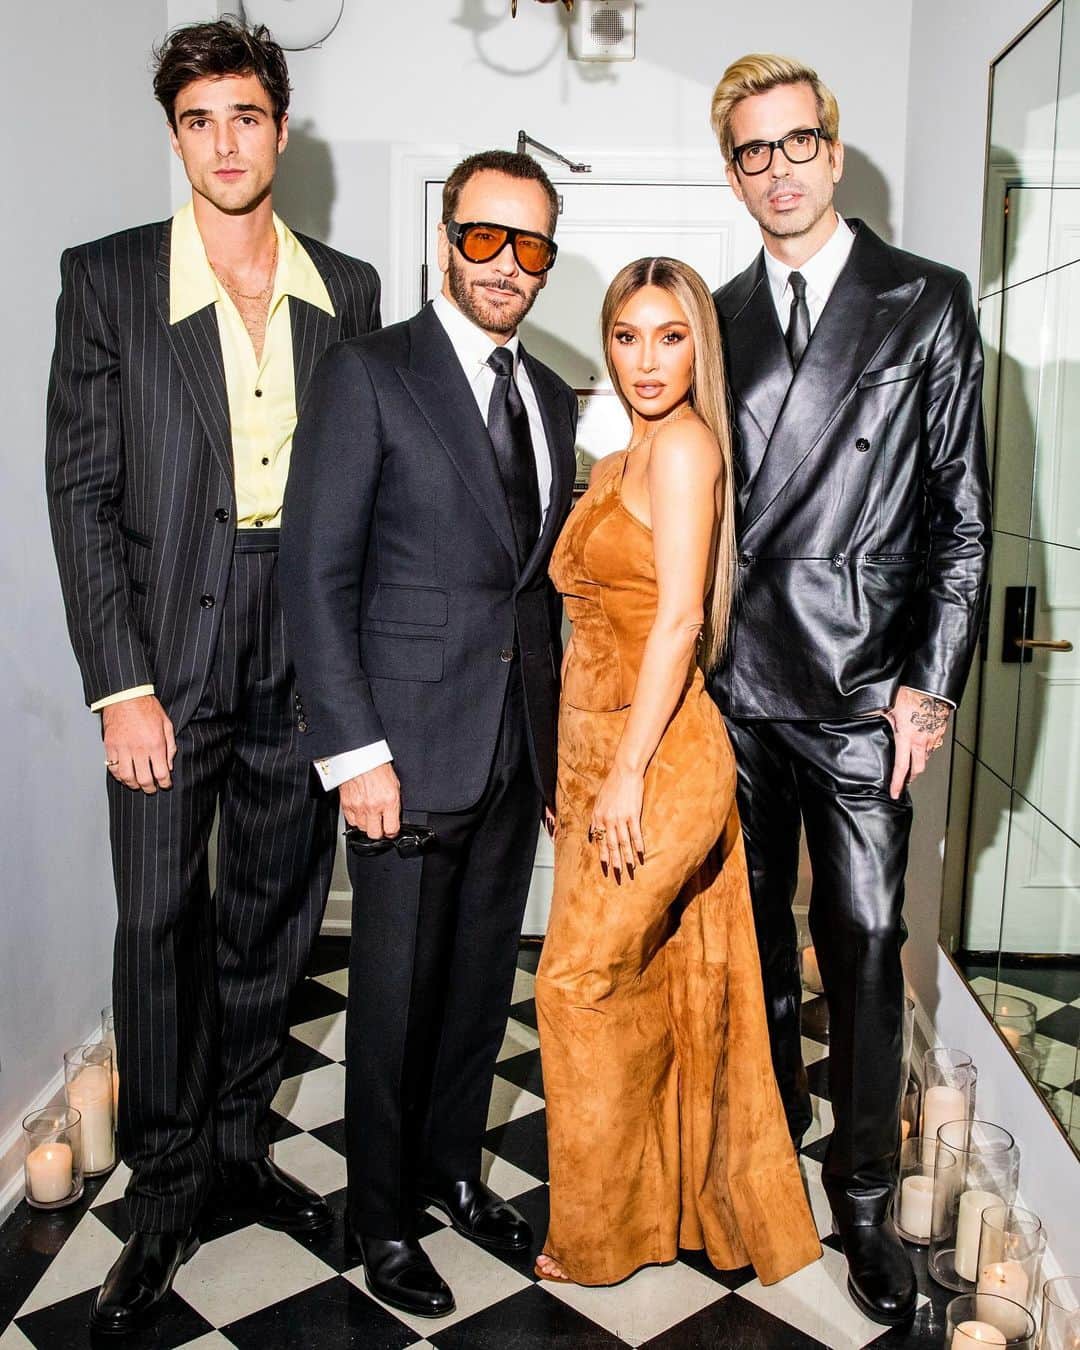 GQのインスタグラム：「Before last night’s #GQMOTY party in Los Angeles, GQ global editorial director Will Welch hosted an intimate dinner, presented by @spotify, to toast Men of the Year co-hosts @kimkardashian, @travisscott, @jacobelordi and Tom Ford. Take a behind-the-scenes look at what happened inside the dinner at the link in bio. Photographs by @kristaschlueter.」